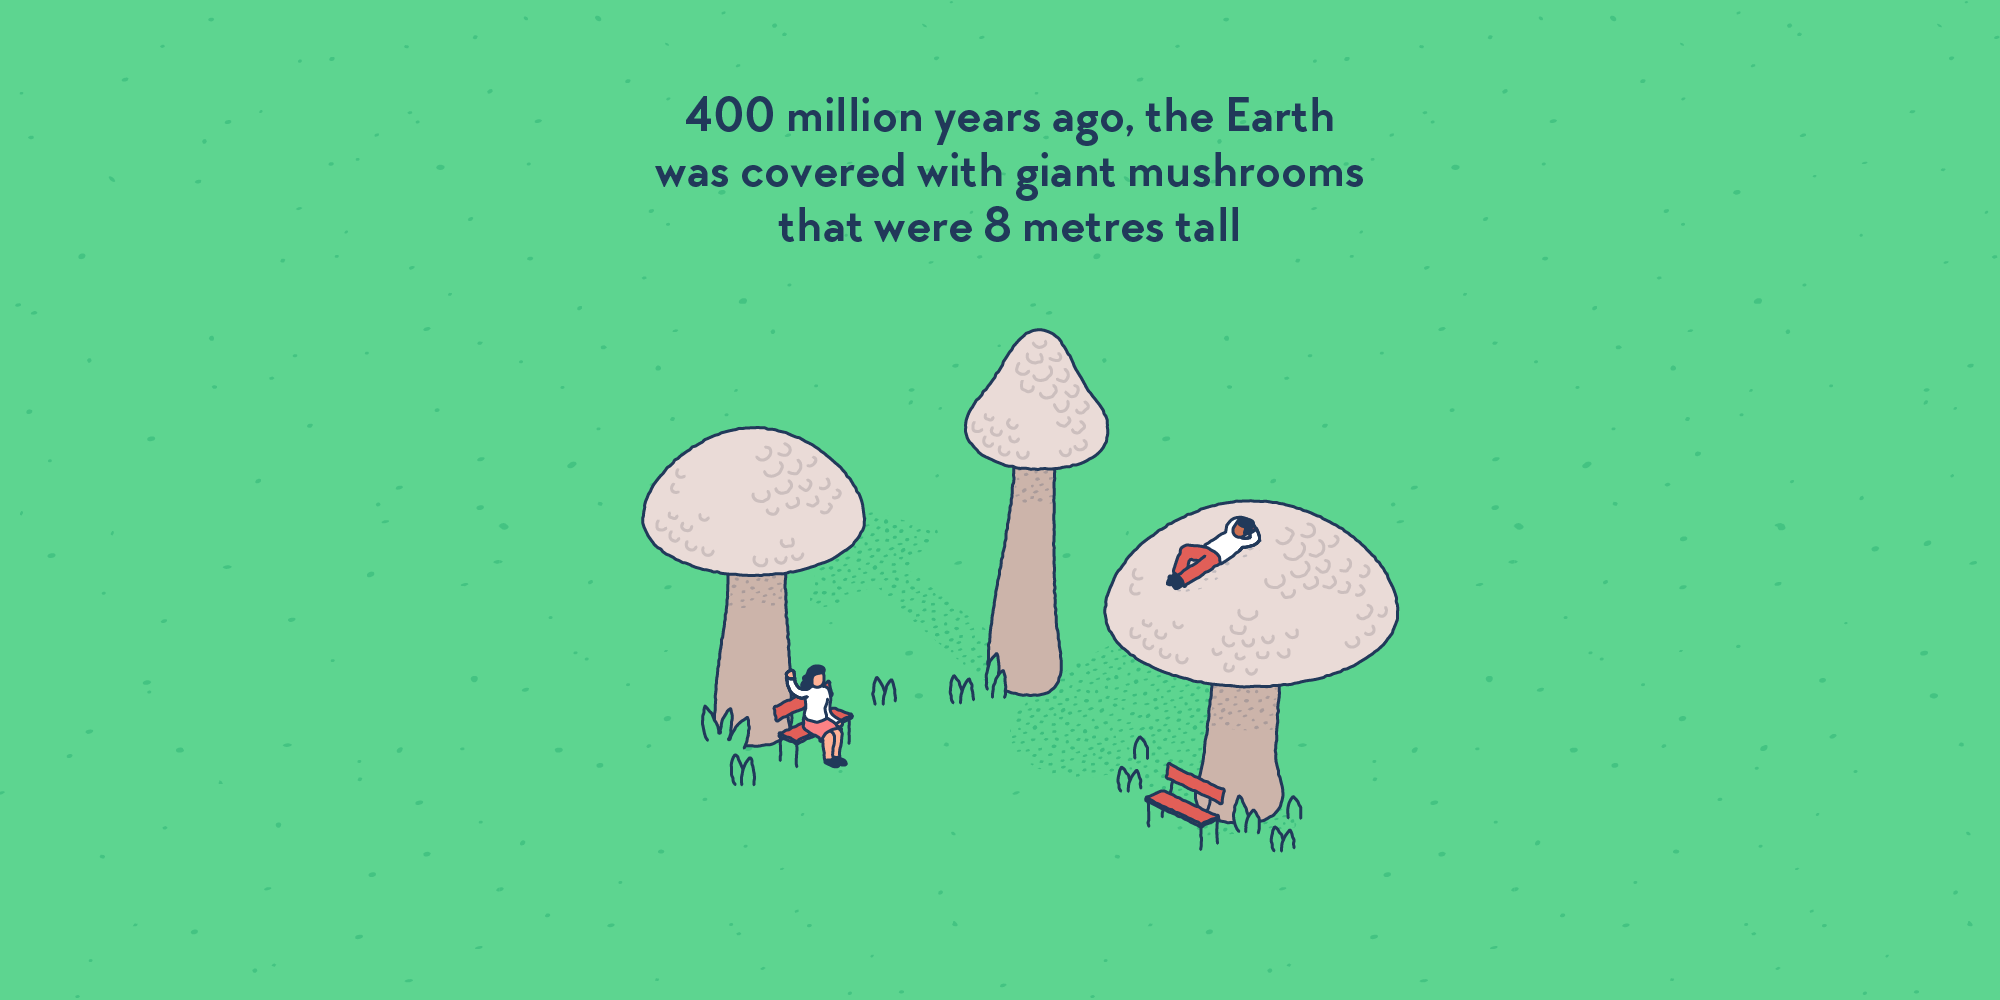 Giant mushrooms, with some people lying on them or sitting in their shade